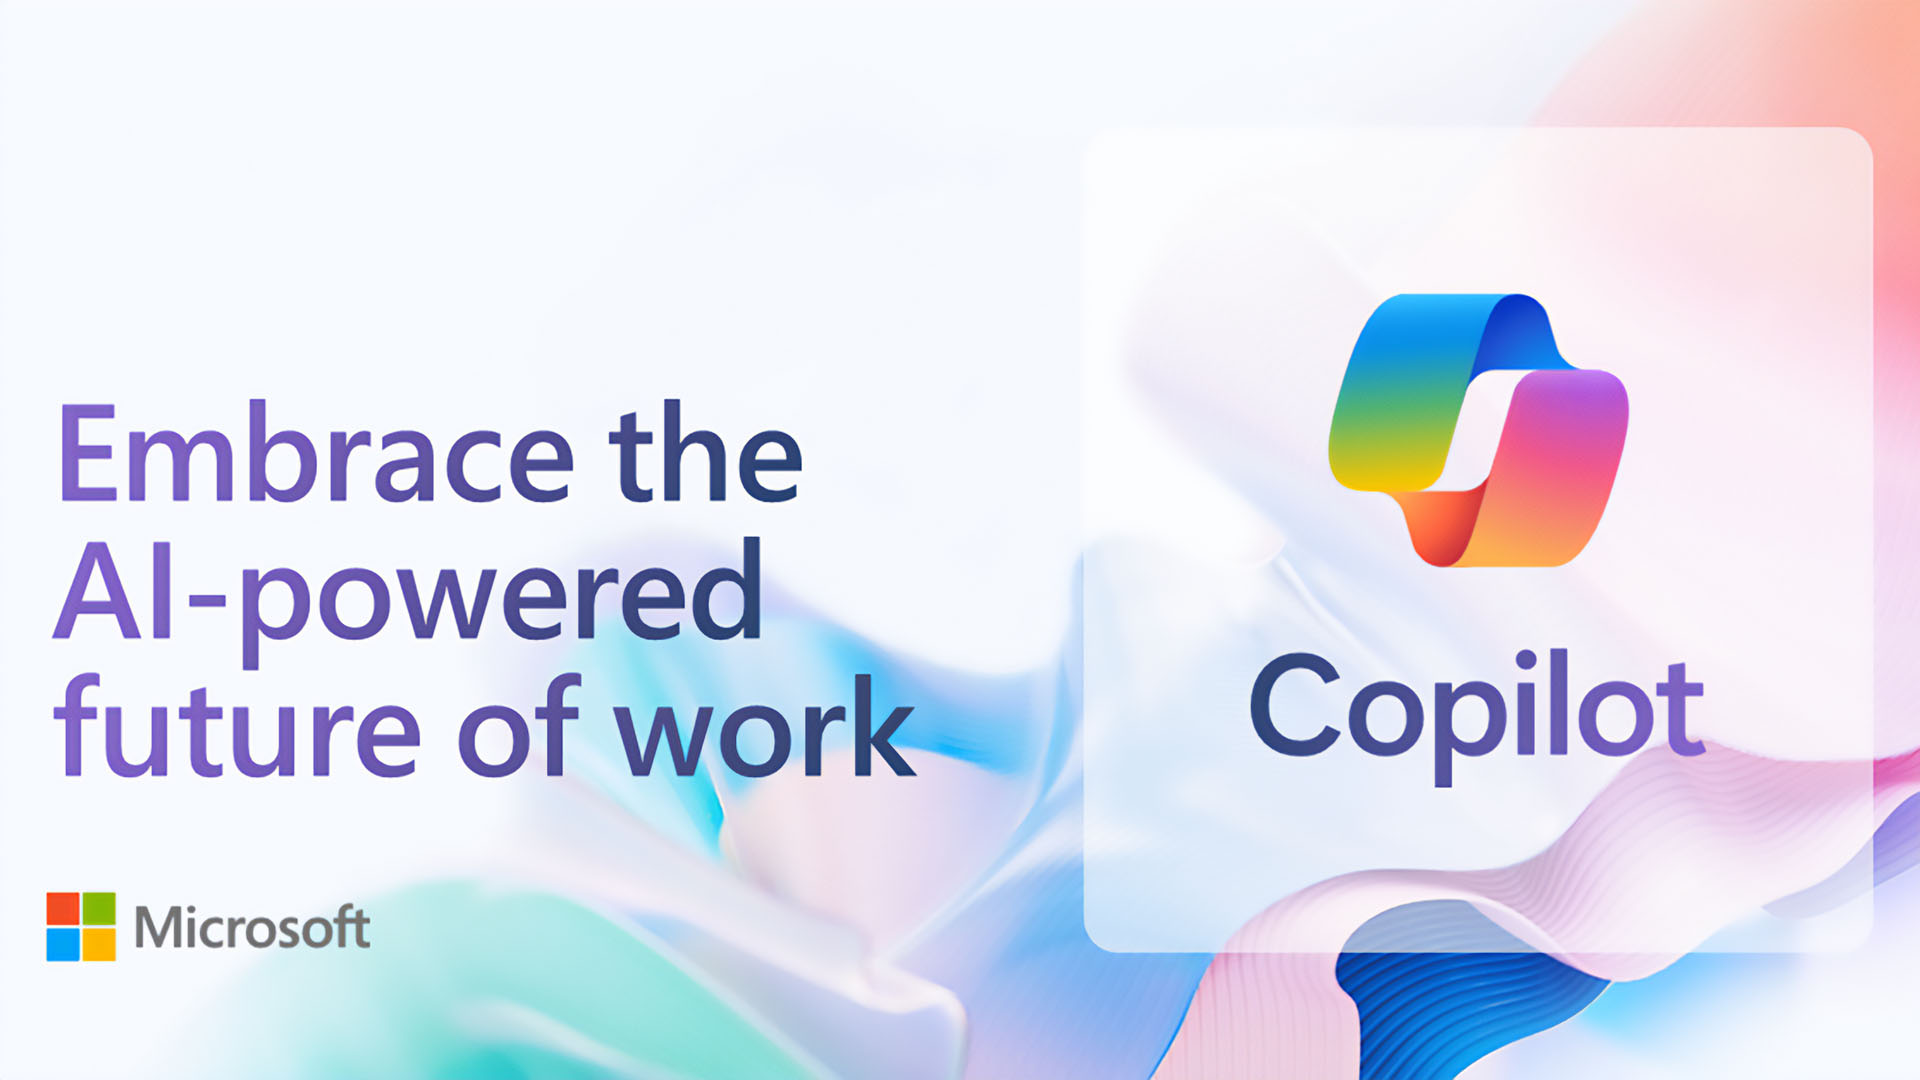 Embrace the AI-powered future of work with Microsoft Copilot